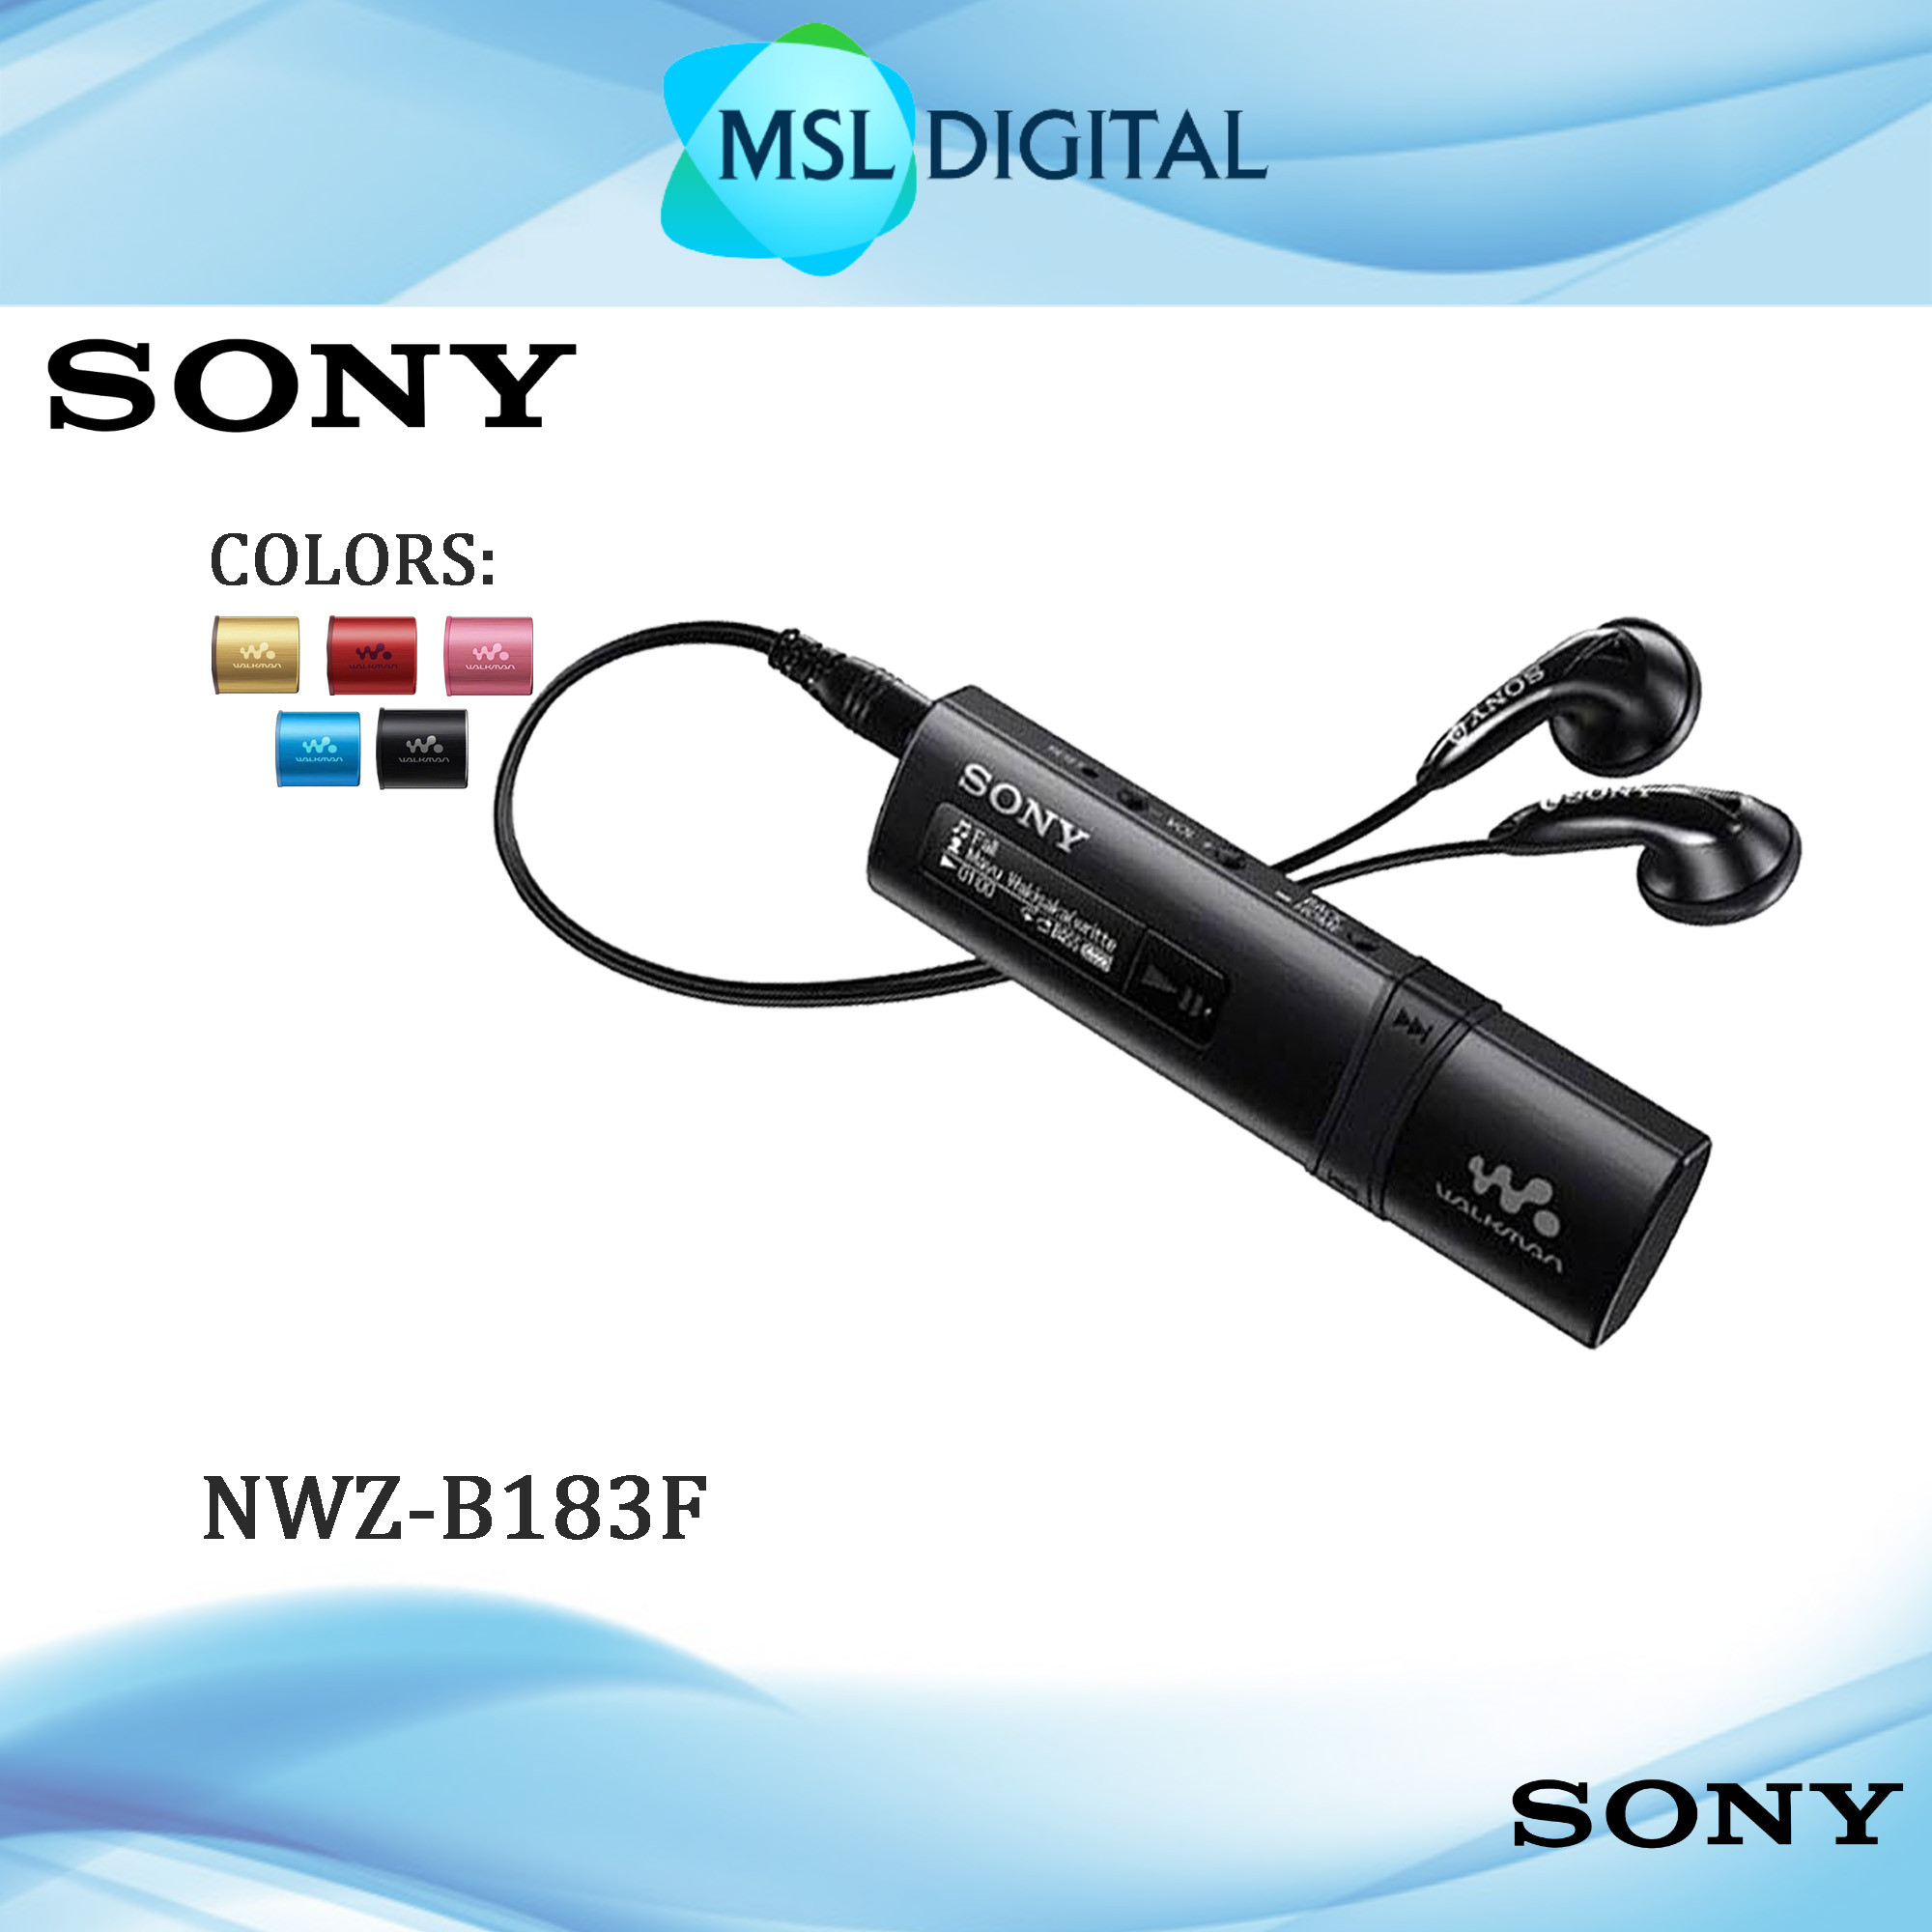 Original Sony NWZ-B183F B183F Flash MP3 Player with Built-in FM Tuner (4GB)  - with headset